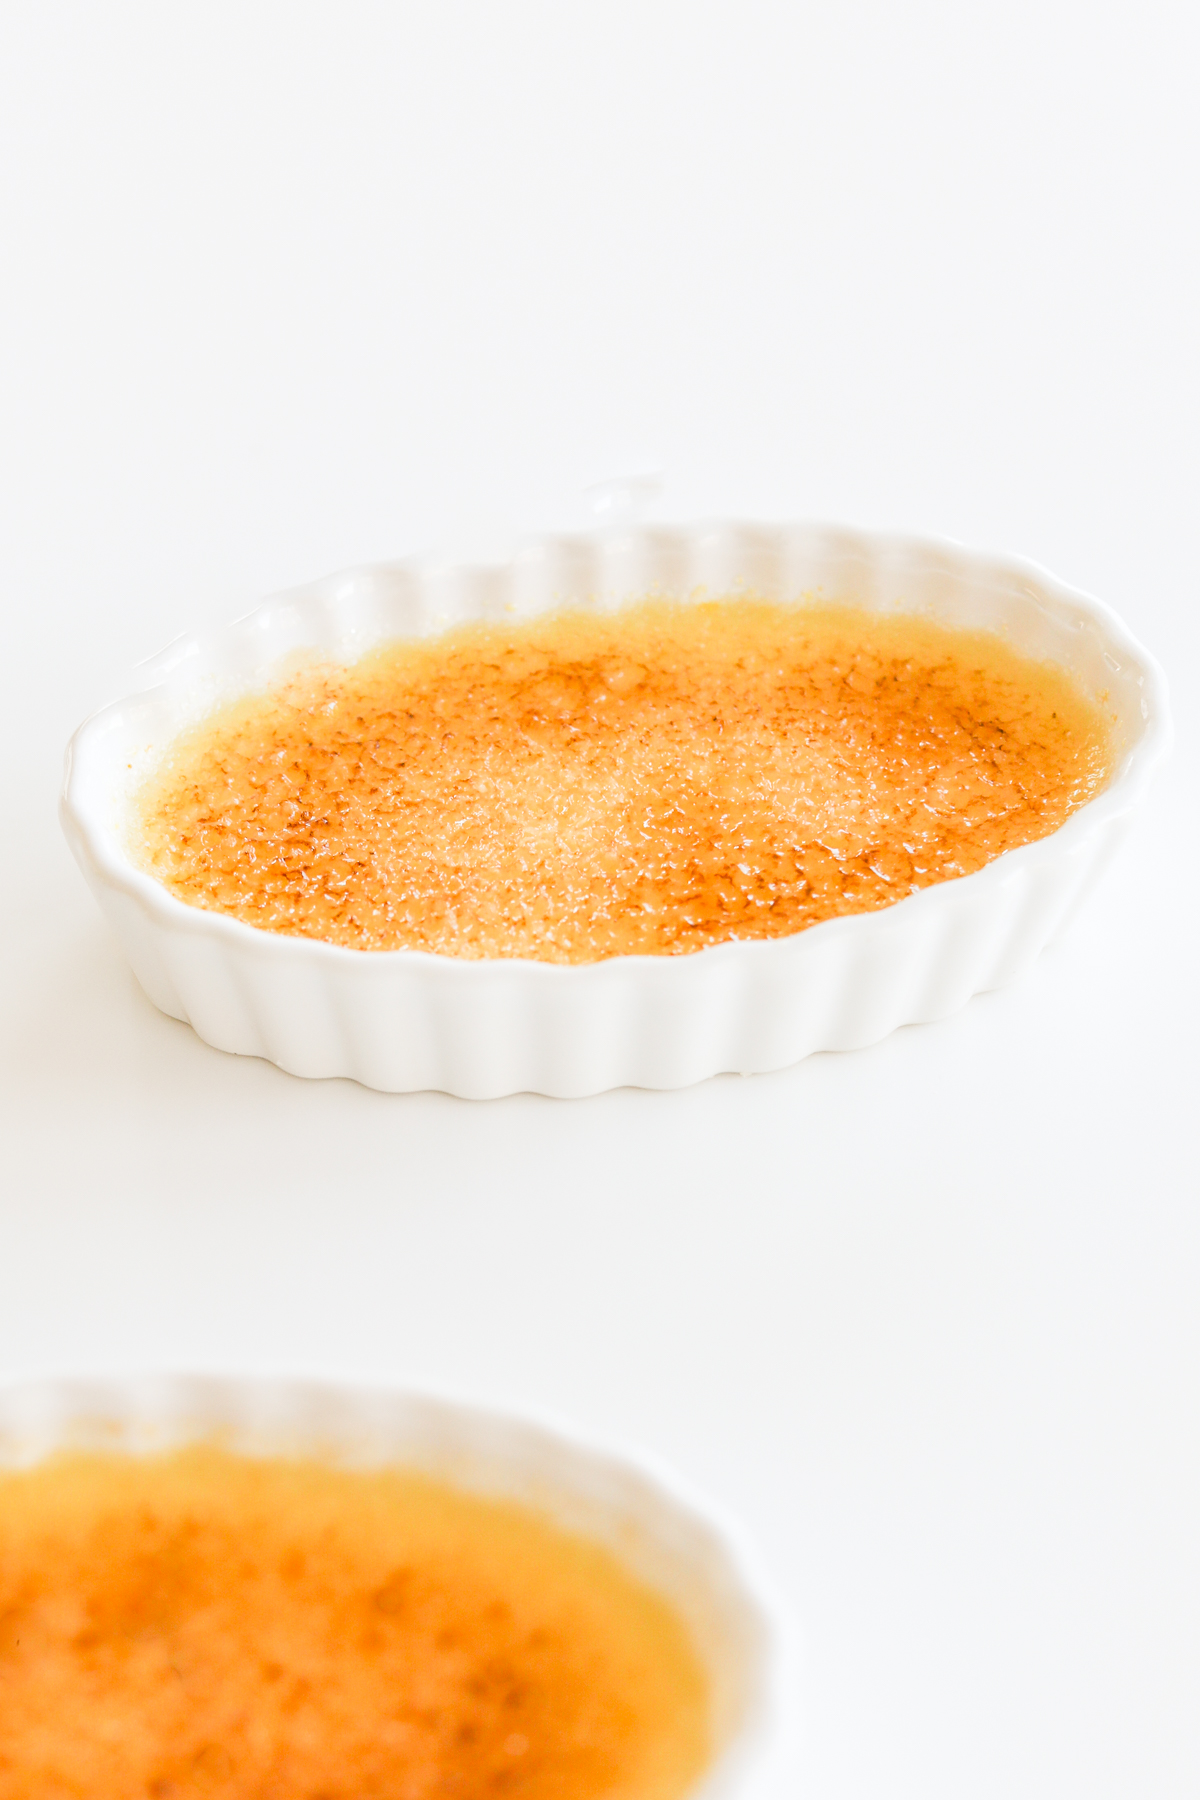 Two dishes of easy creme brulee on a white surface.